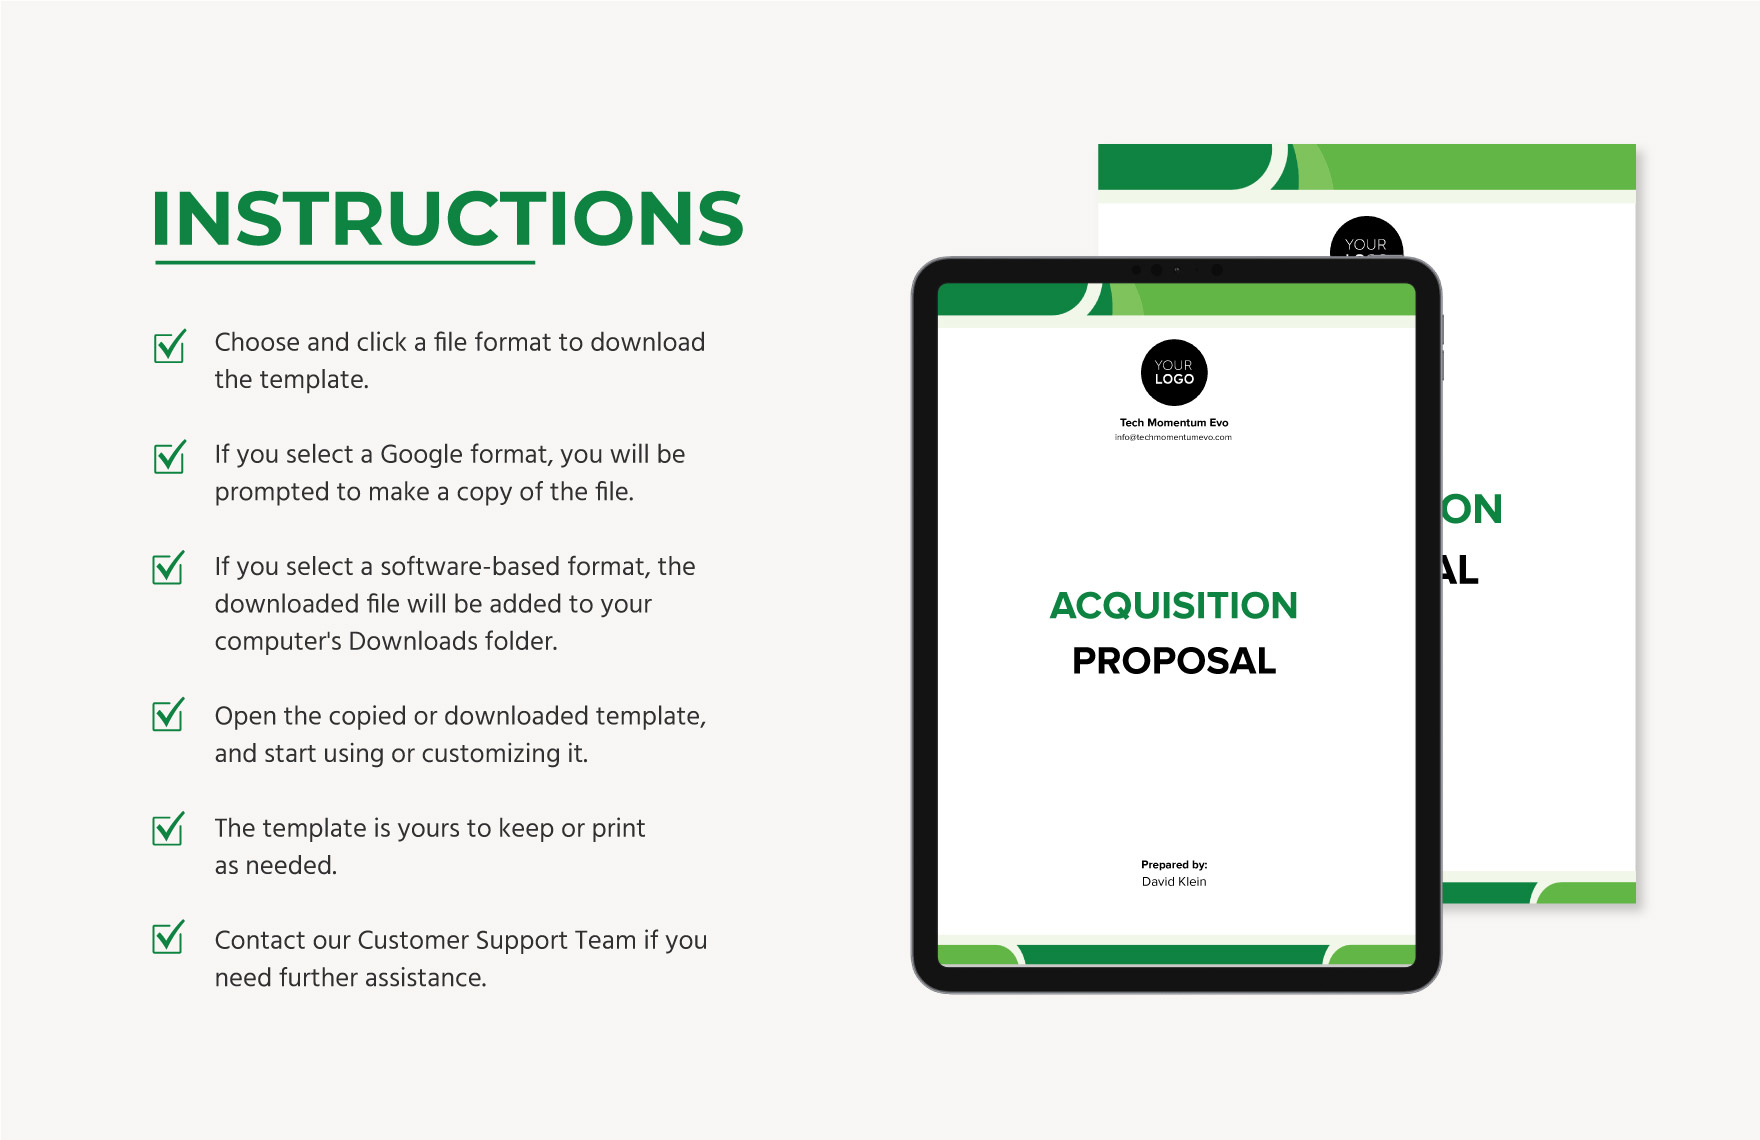 Acquisition Proposal Template in GDocsLink MS Word Portable Documents